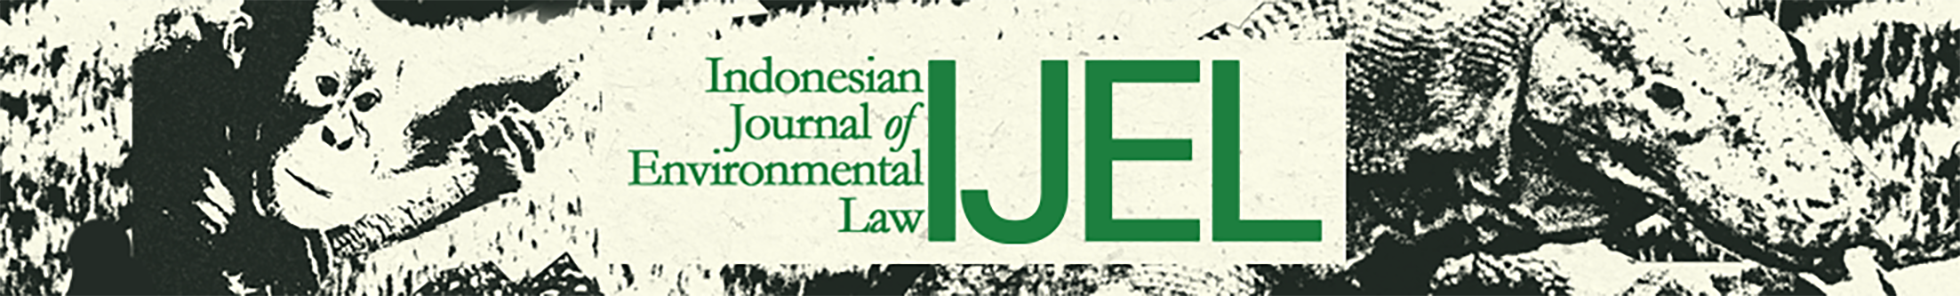 Indonesian Journal of Environmental Law